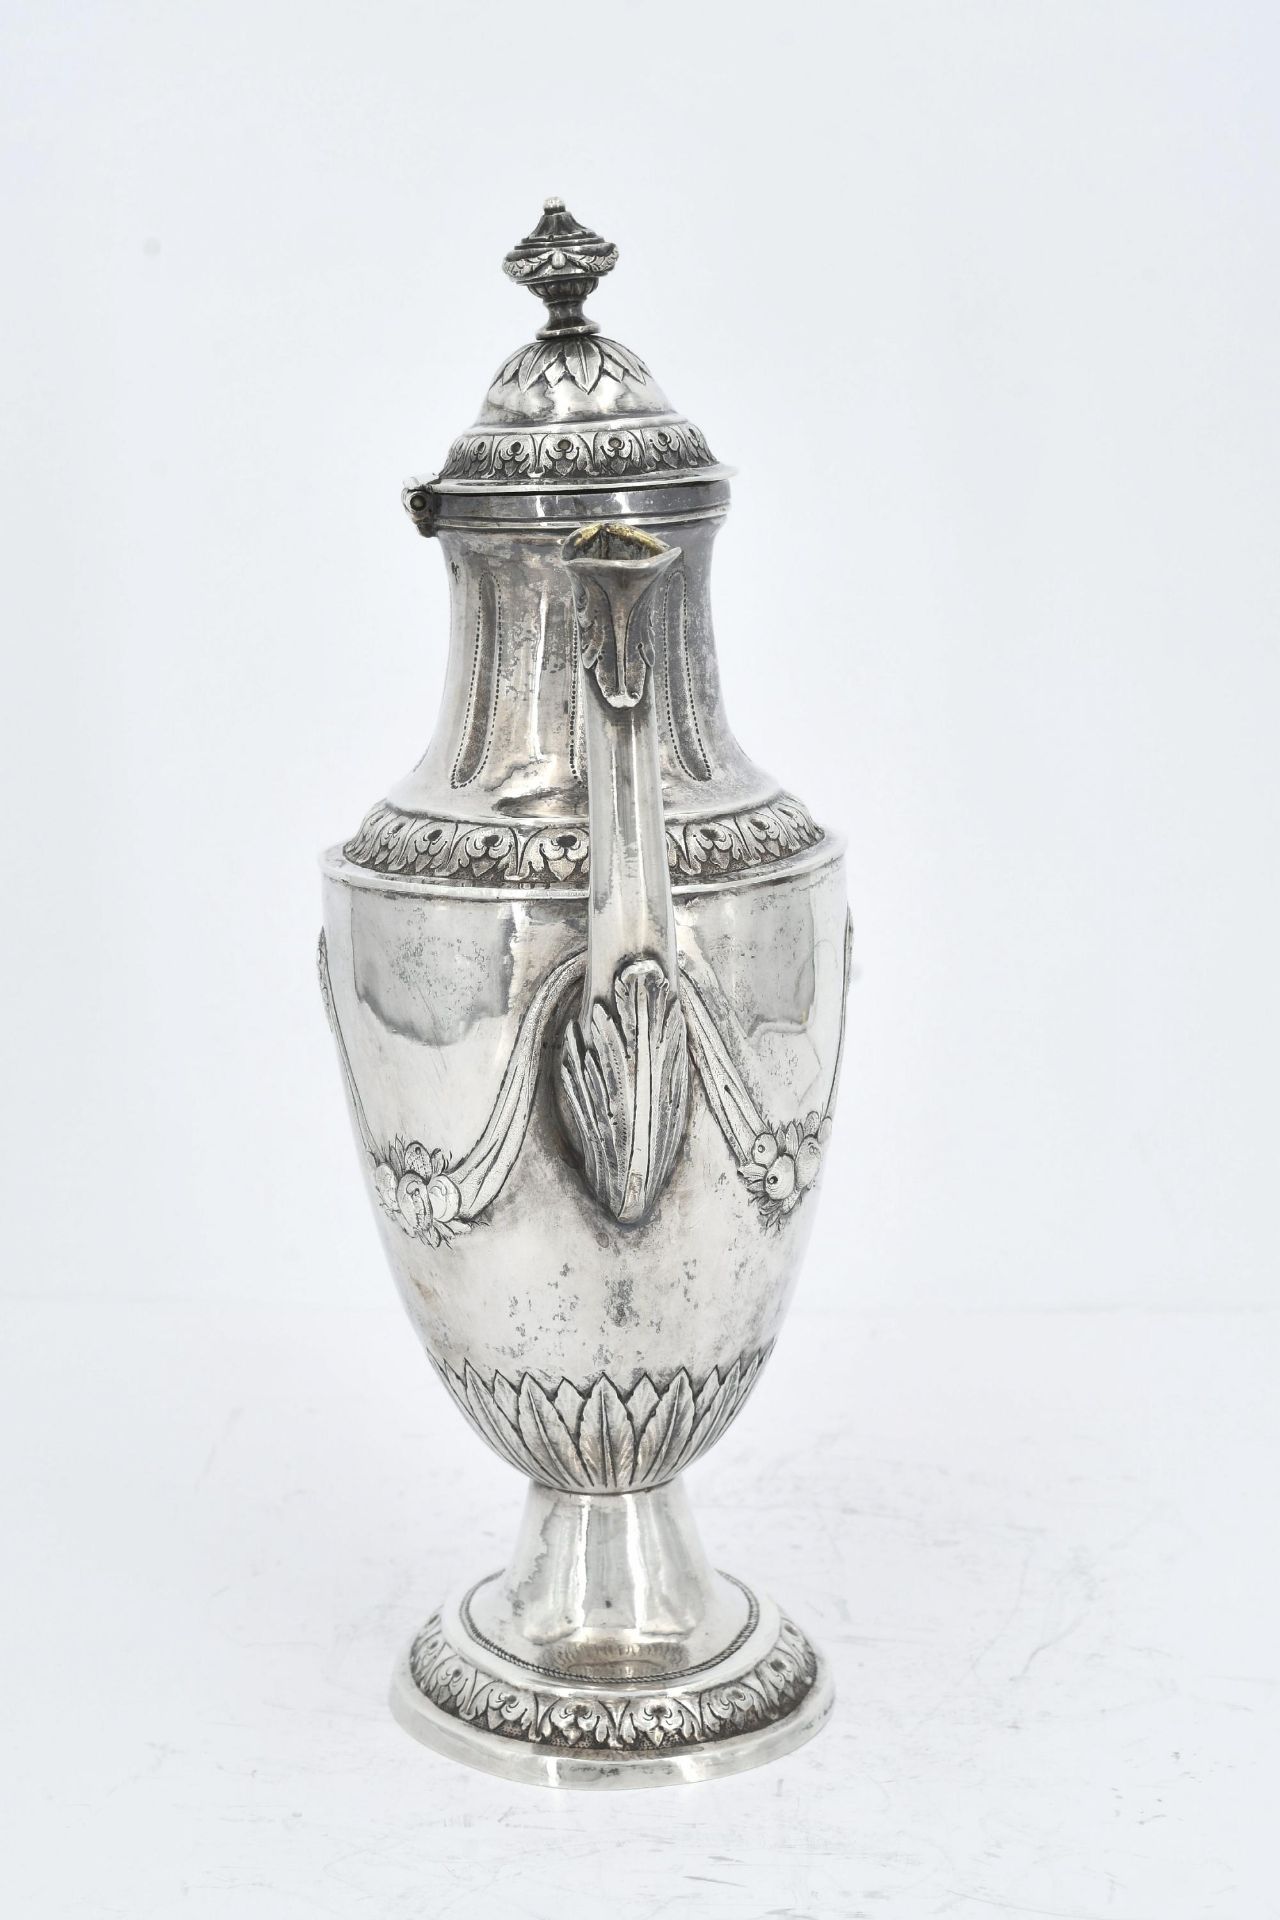 Silver coffee pot and hot-water jug with fruit festoons and lancet leaf decor - Image 3 of 14